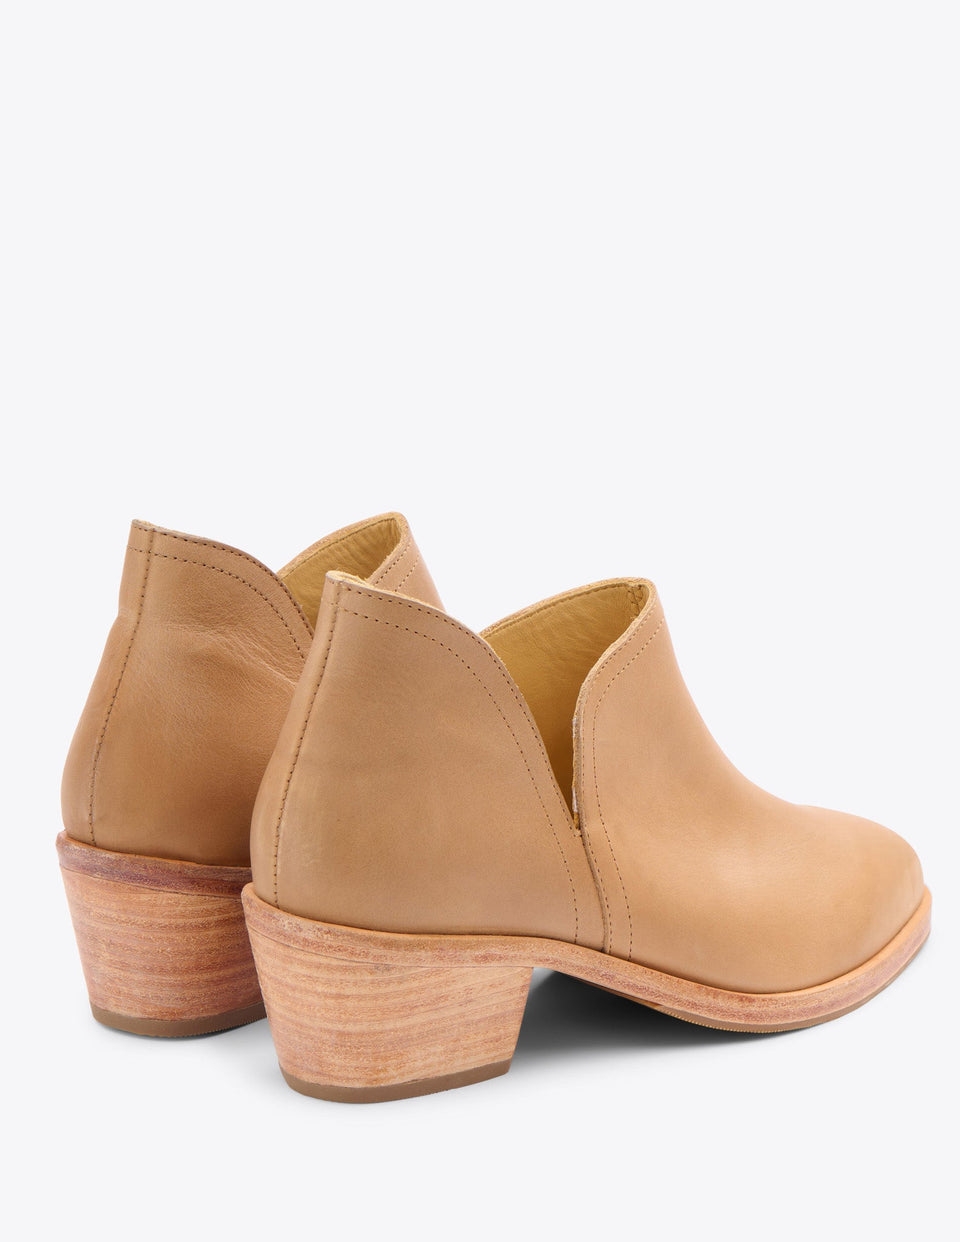 Everyday Ankle Bootie Almond